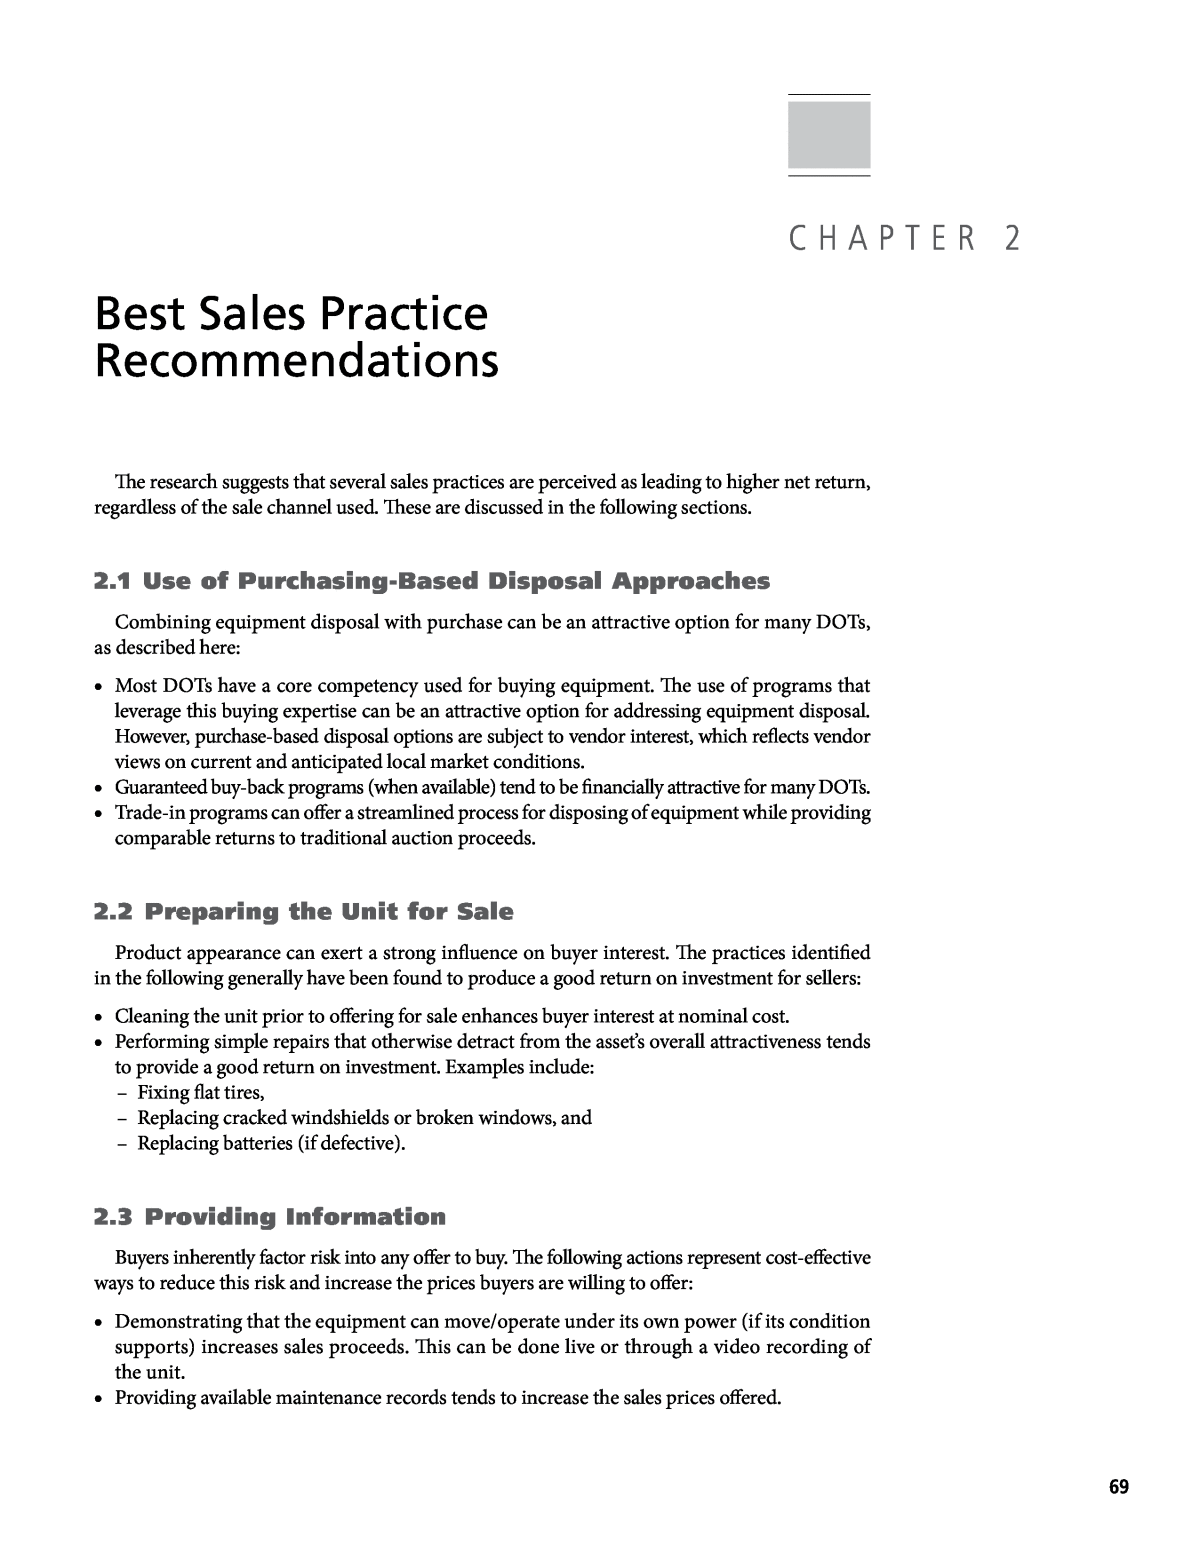 Maximize Sales with 's Best-Sellers